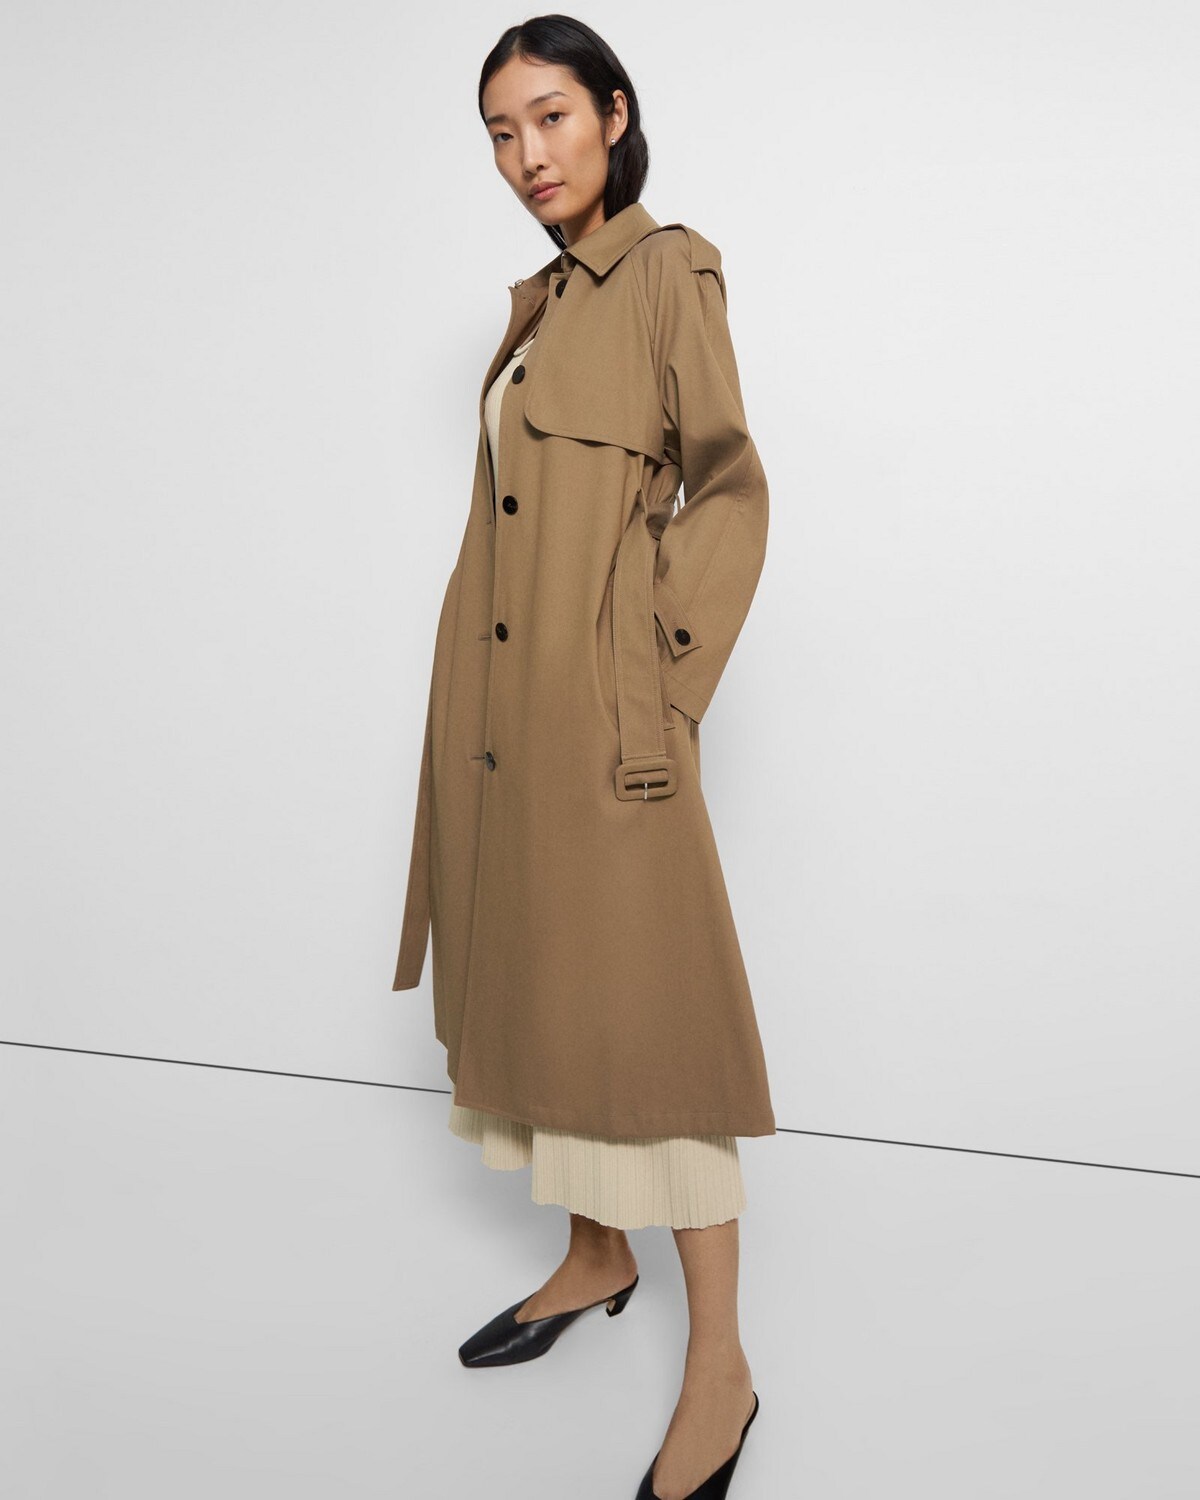 Belted Trench Coat in Technical Twill